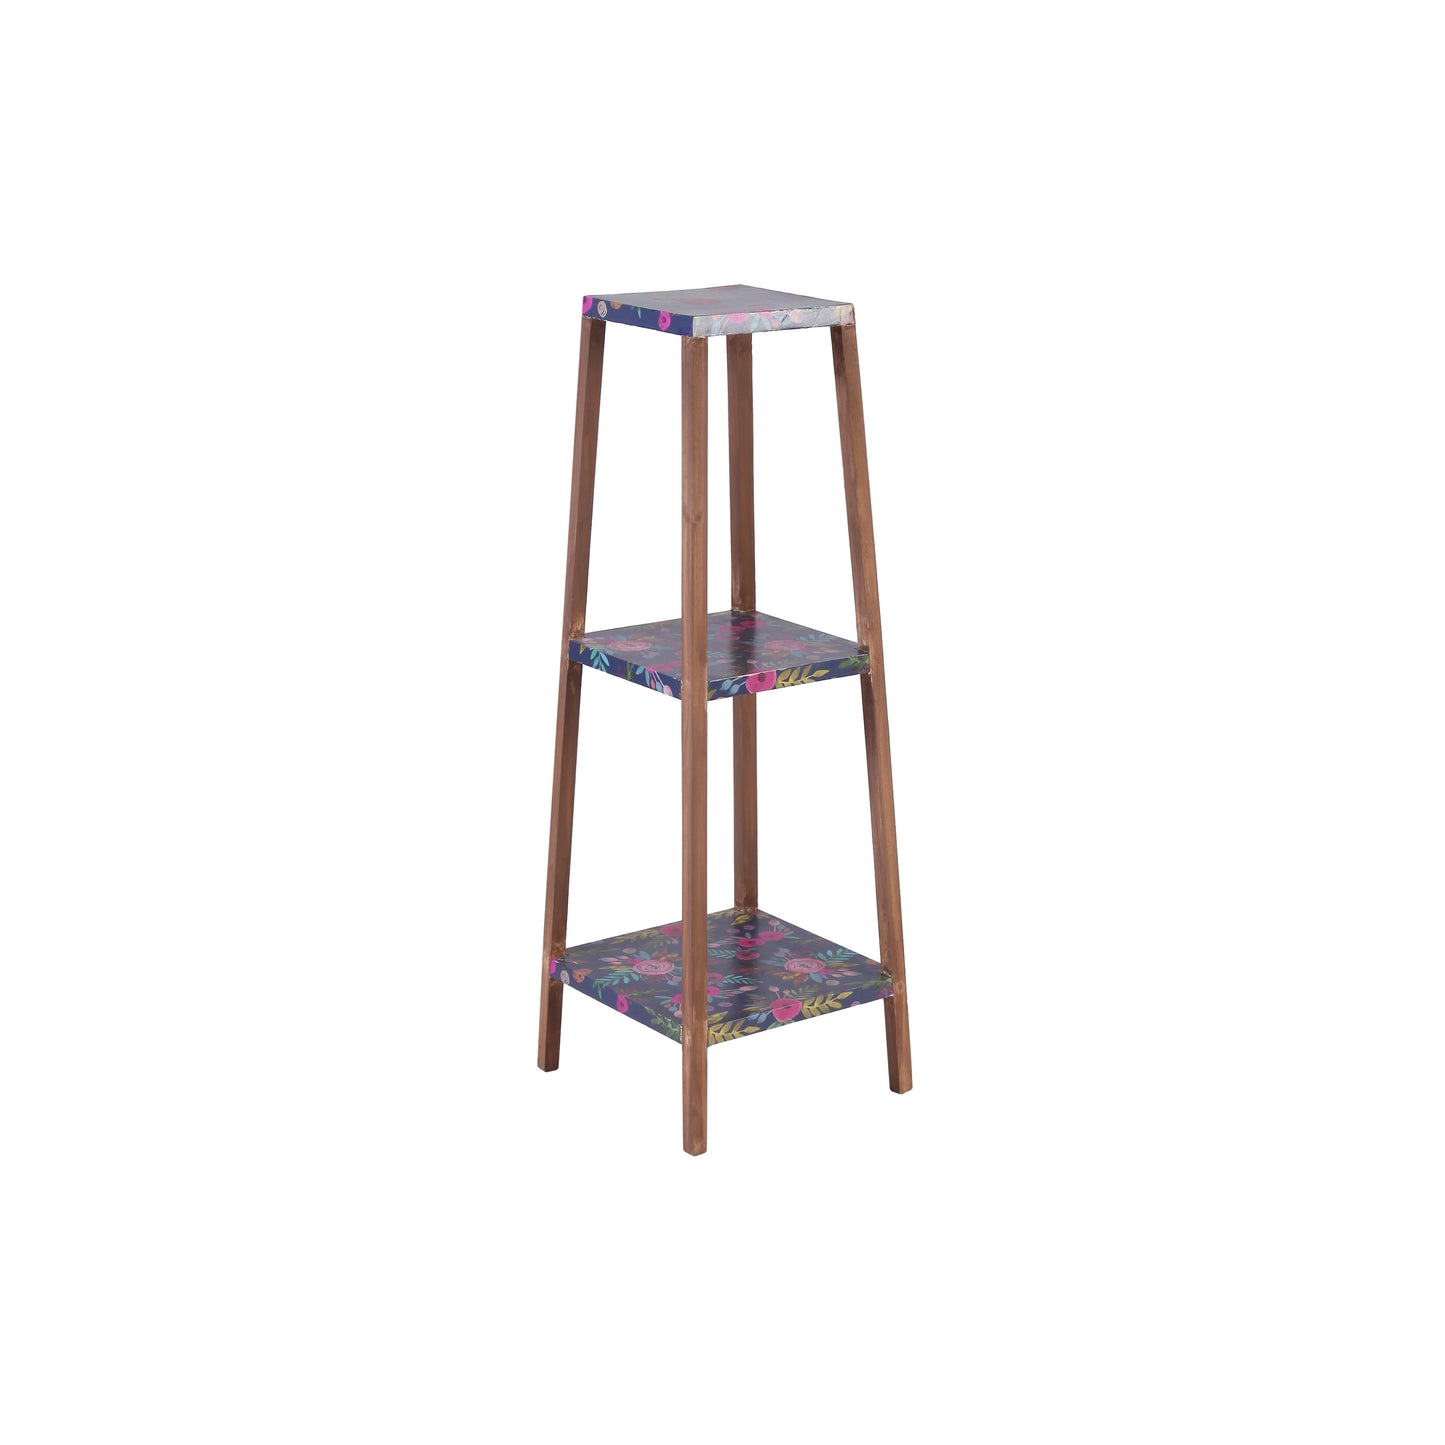 A Tiny Mistake Square Four Legged Tapering Three Tier Decorative Stand (Three Tiers) (Floral Base with Dark Legs)